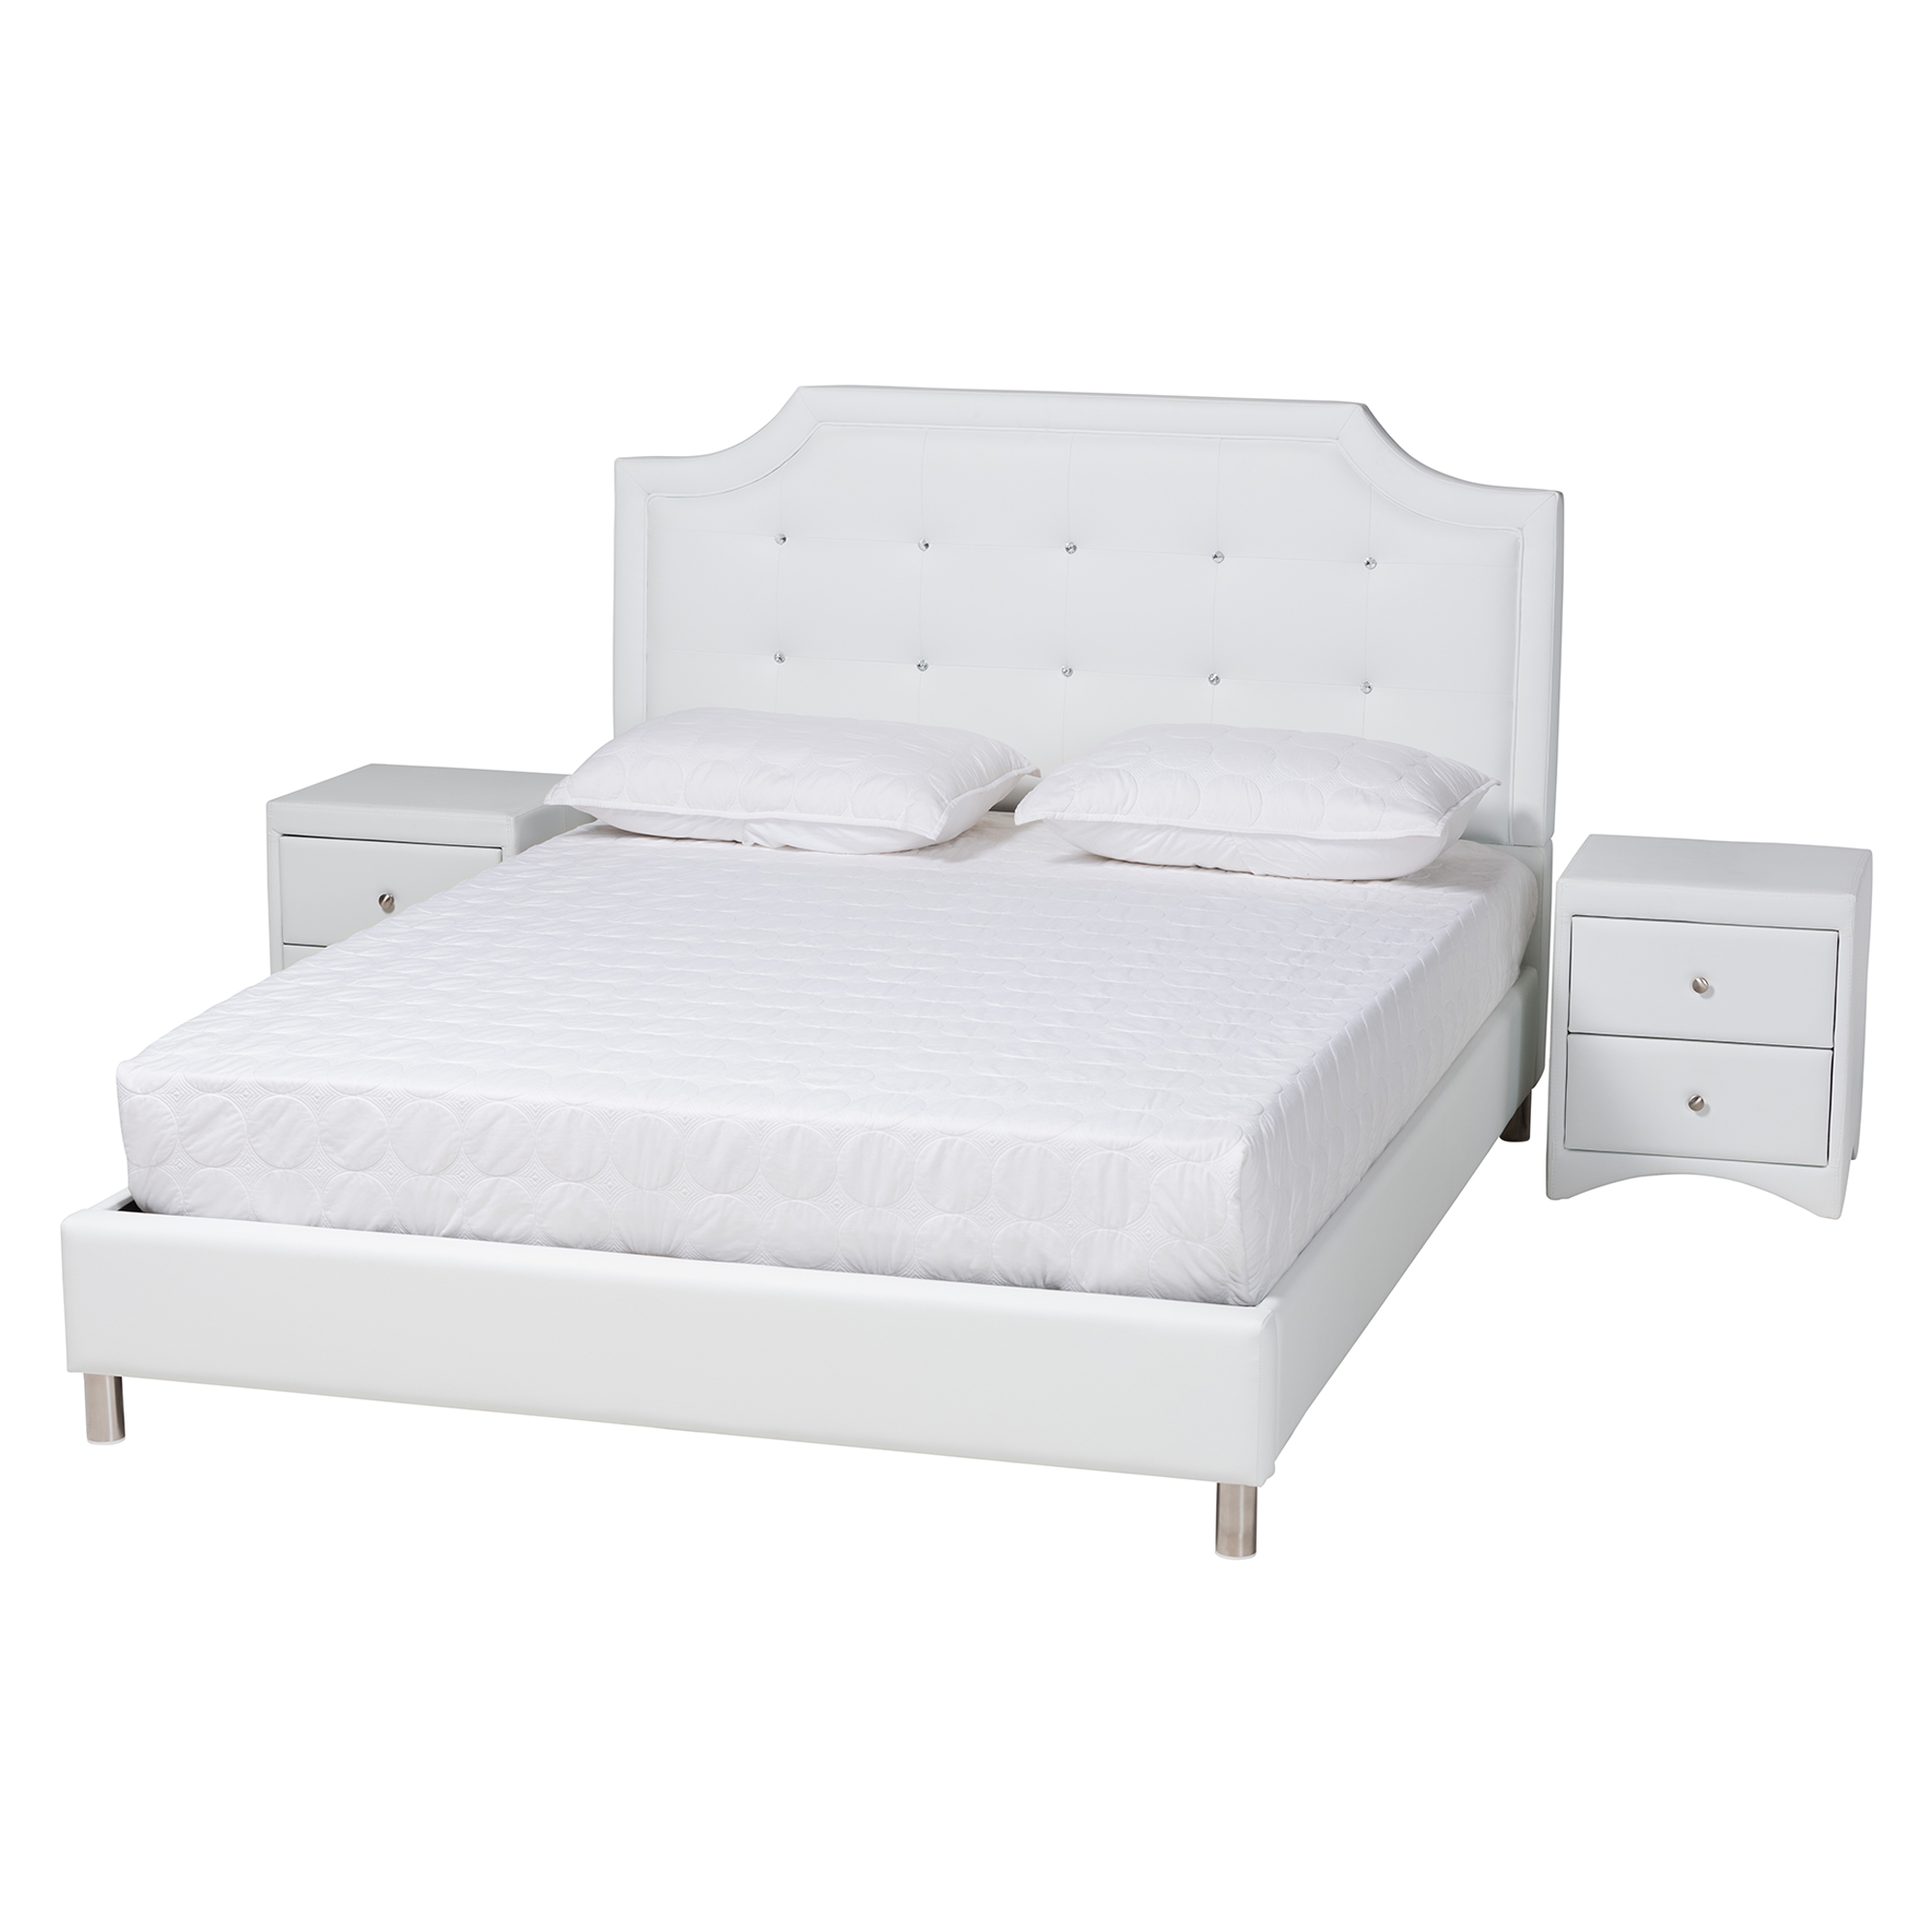 Baxton Studio Carlotta Contemporary Glam White Faux Leather Upholstered Full Size 3-Piece Bedroom Set